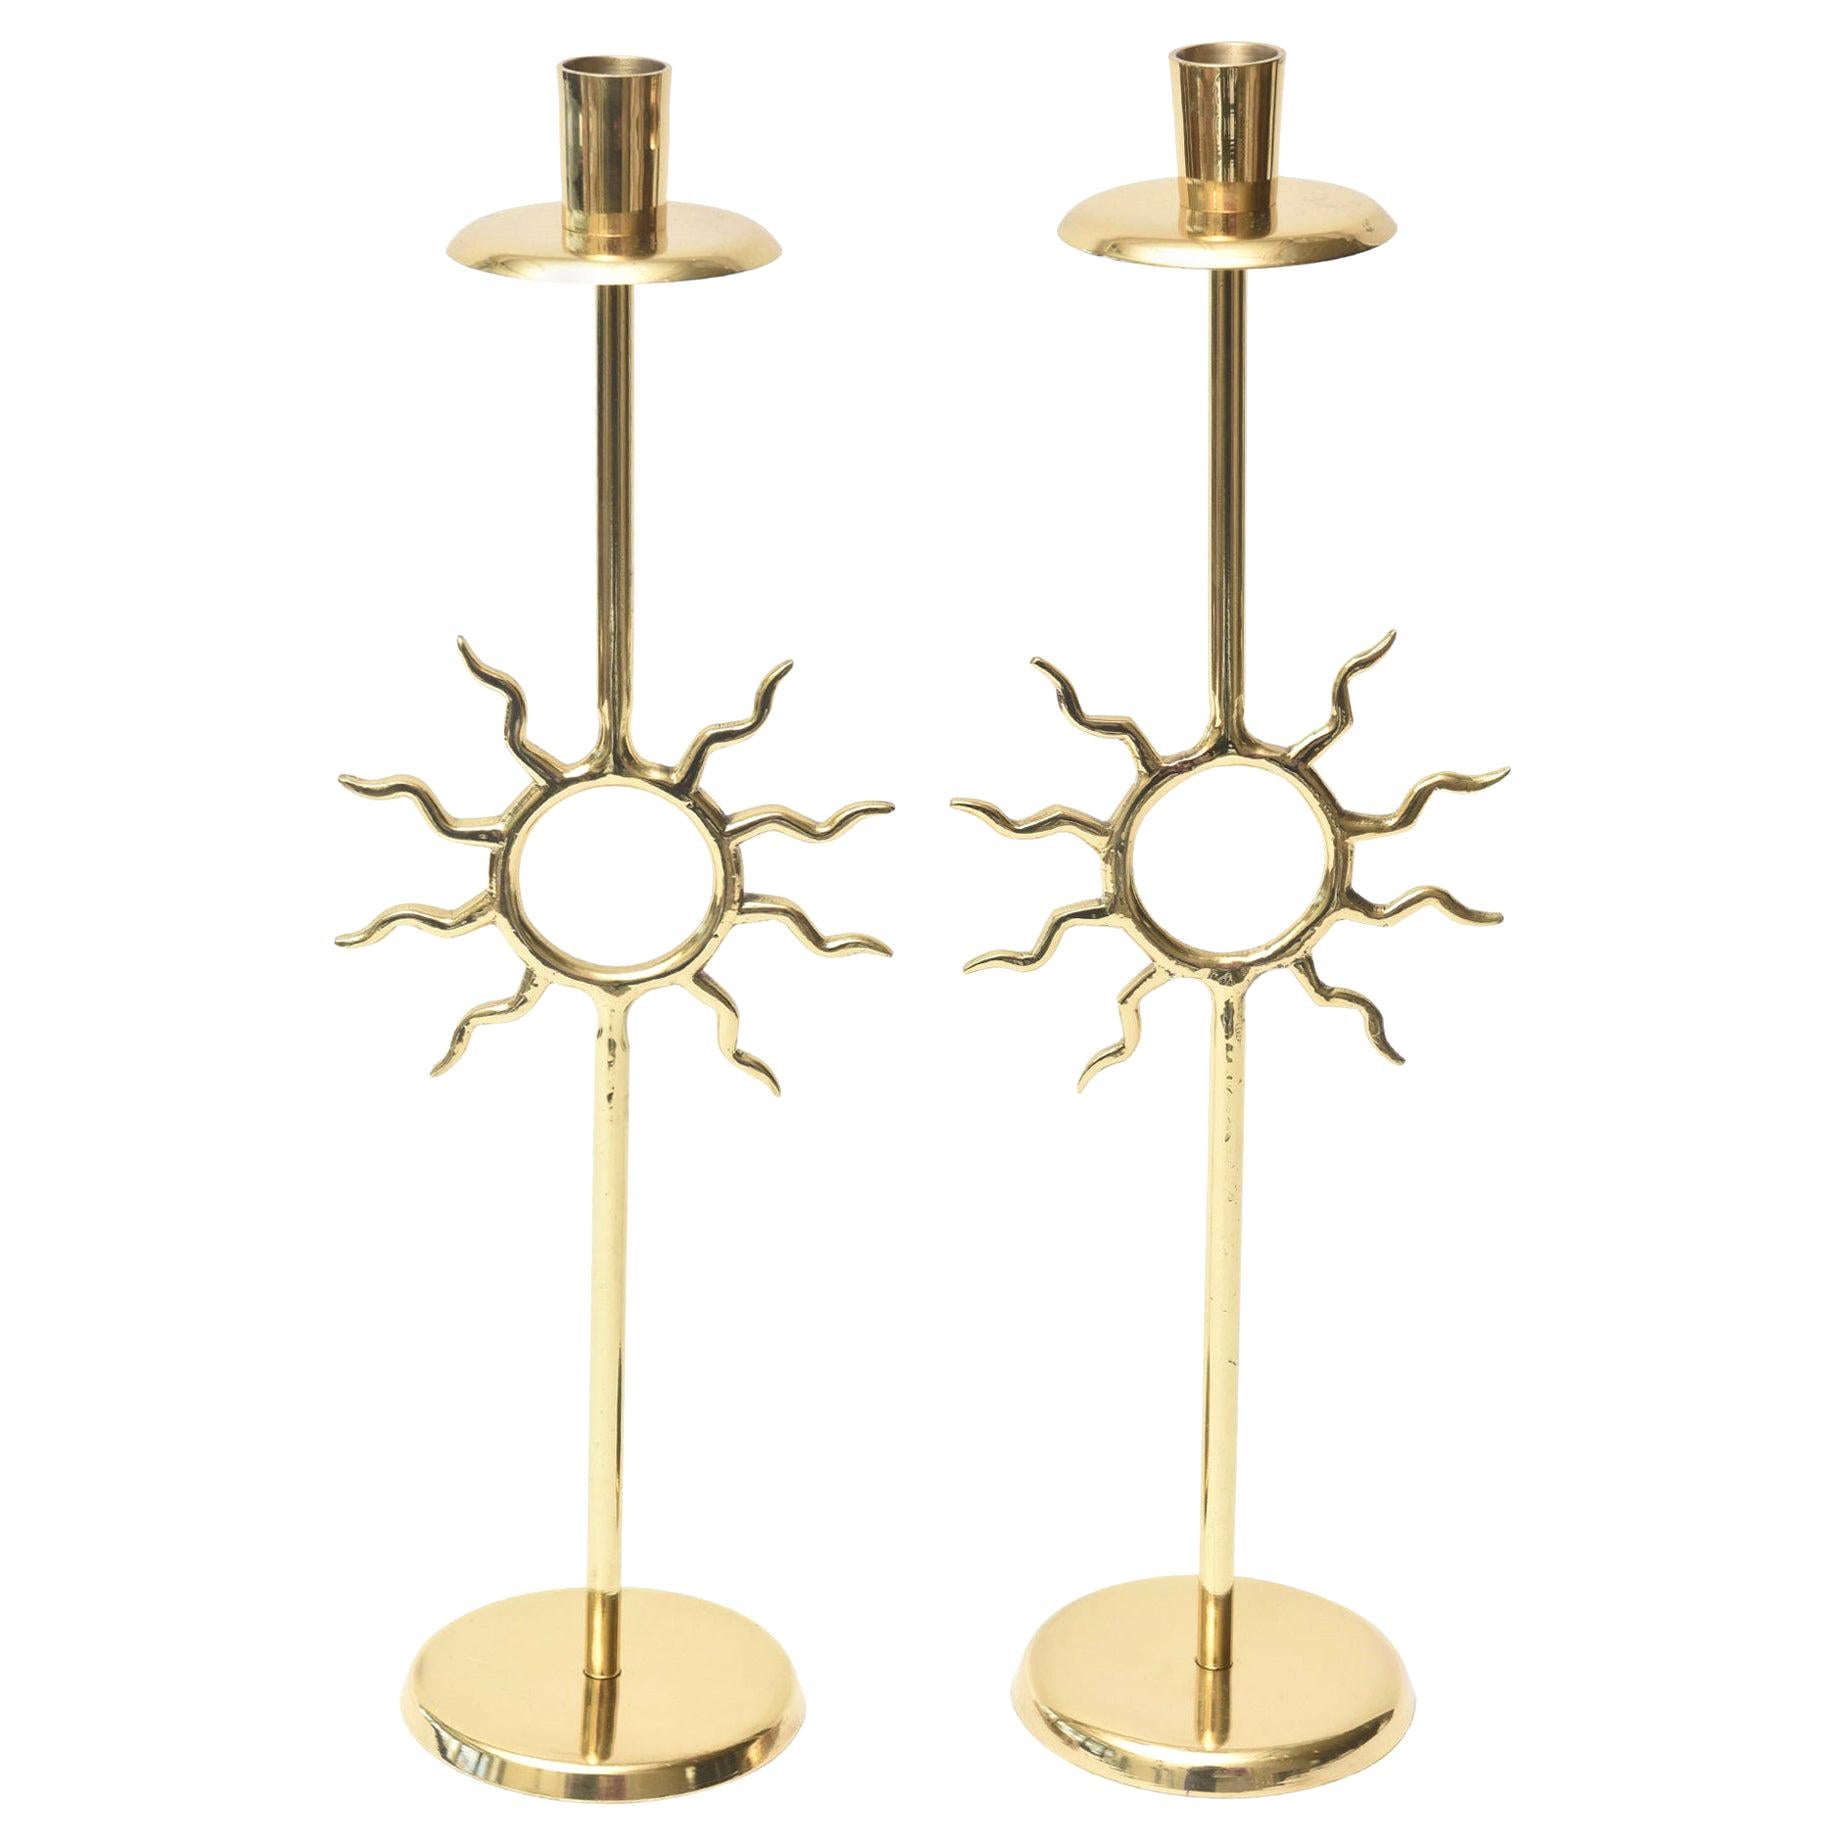 Brass Candlesticks Fornasetti Style with Sun Motif  Vintage Pair Of